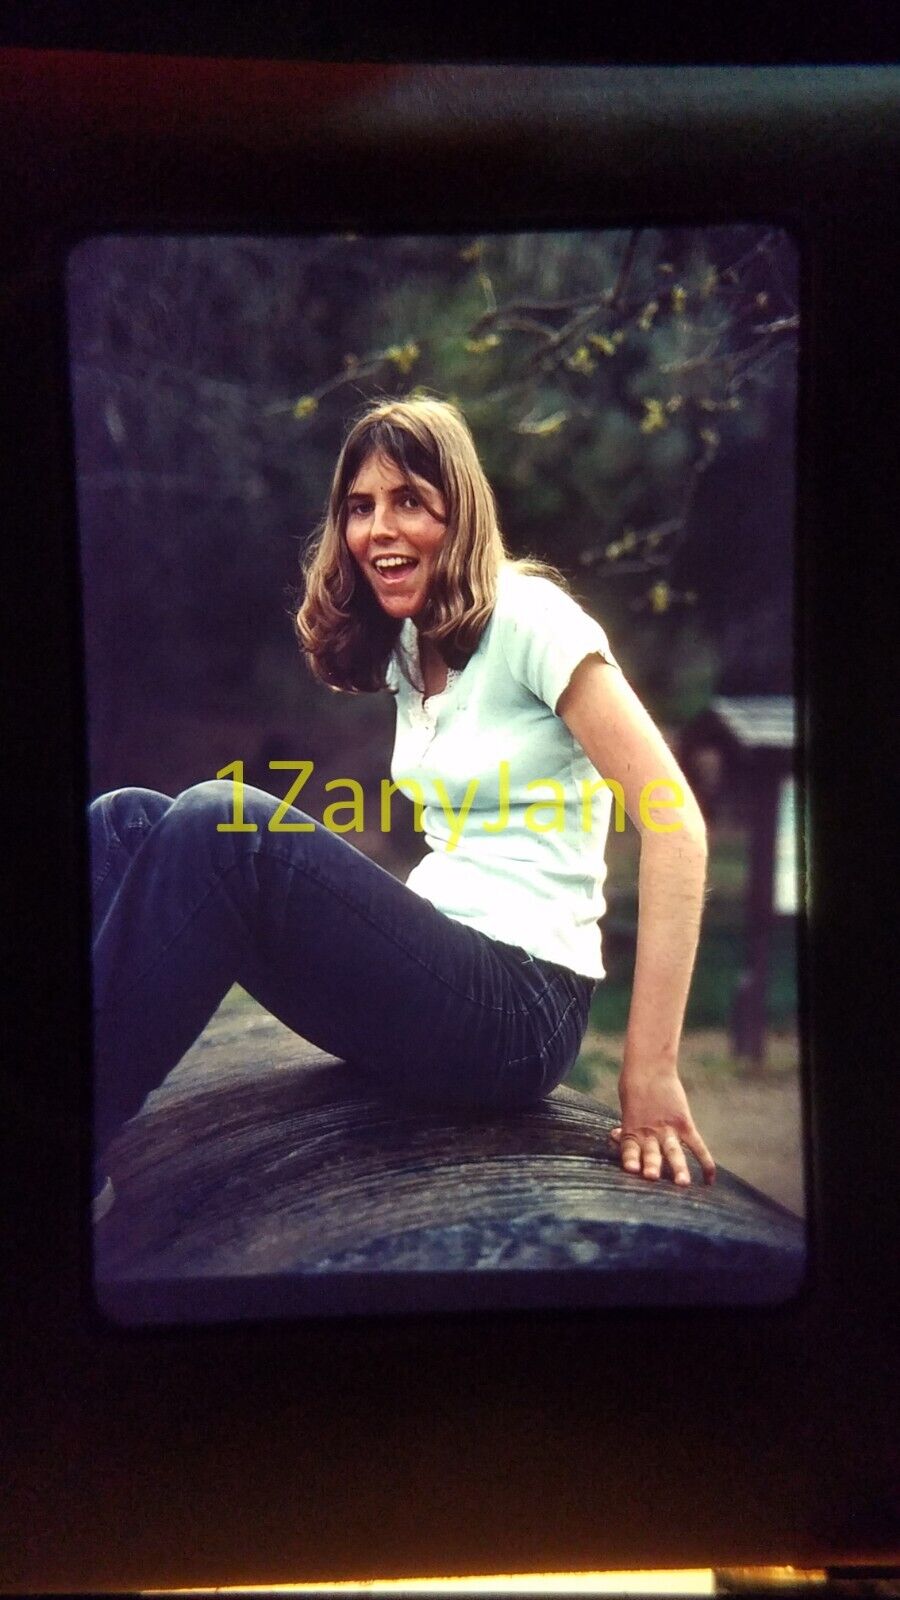 3017 vintage 35MM SLIDE photo WOMAN SITTING WITH KNEES UP